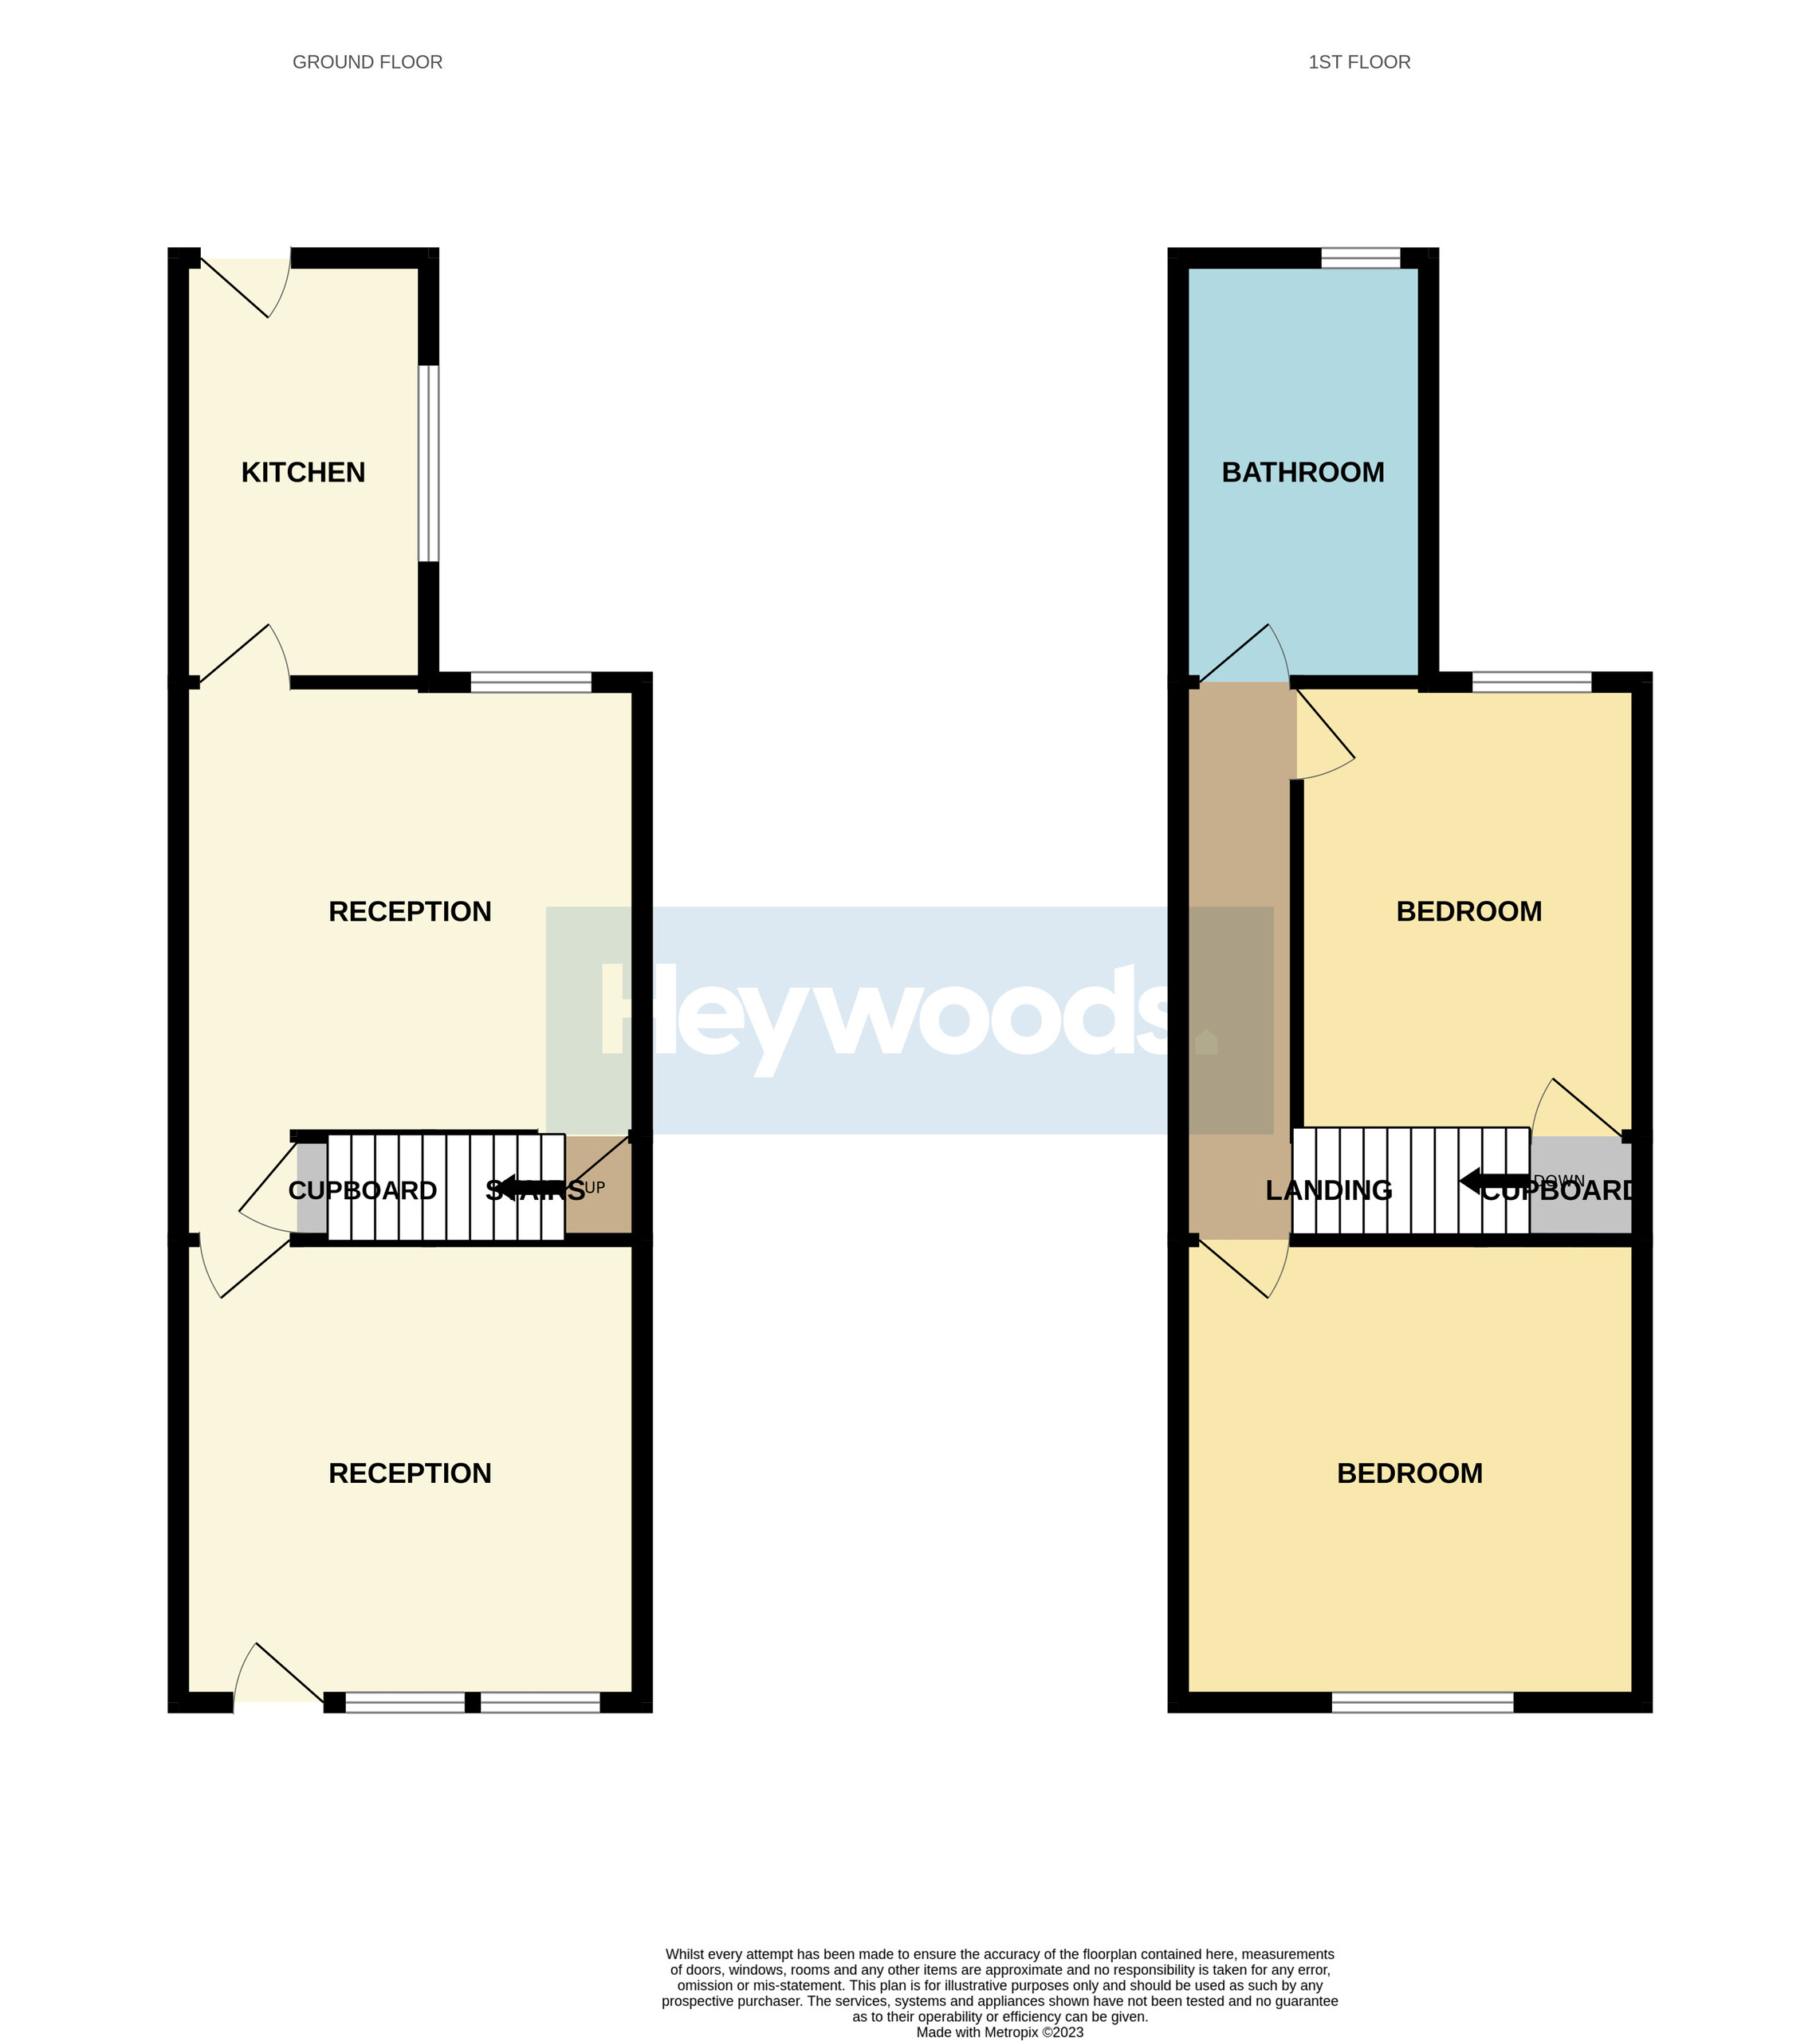 2 bed terraced house for sale in Hartshill, Newcastle-under-Lyme - Property floorplan